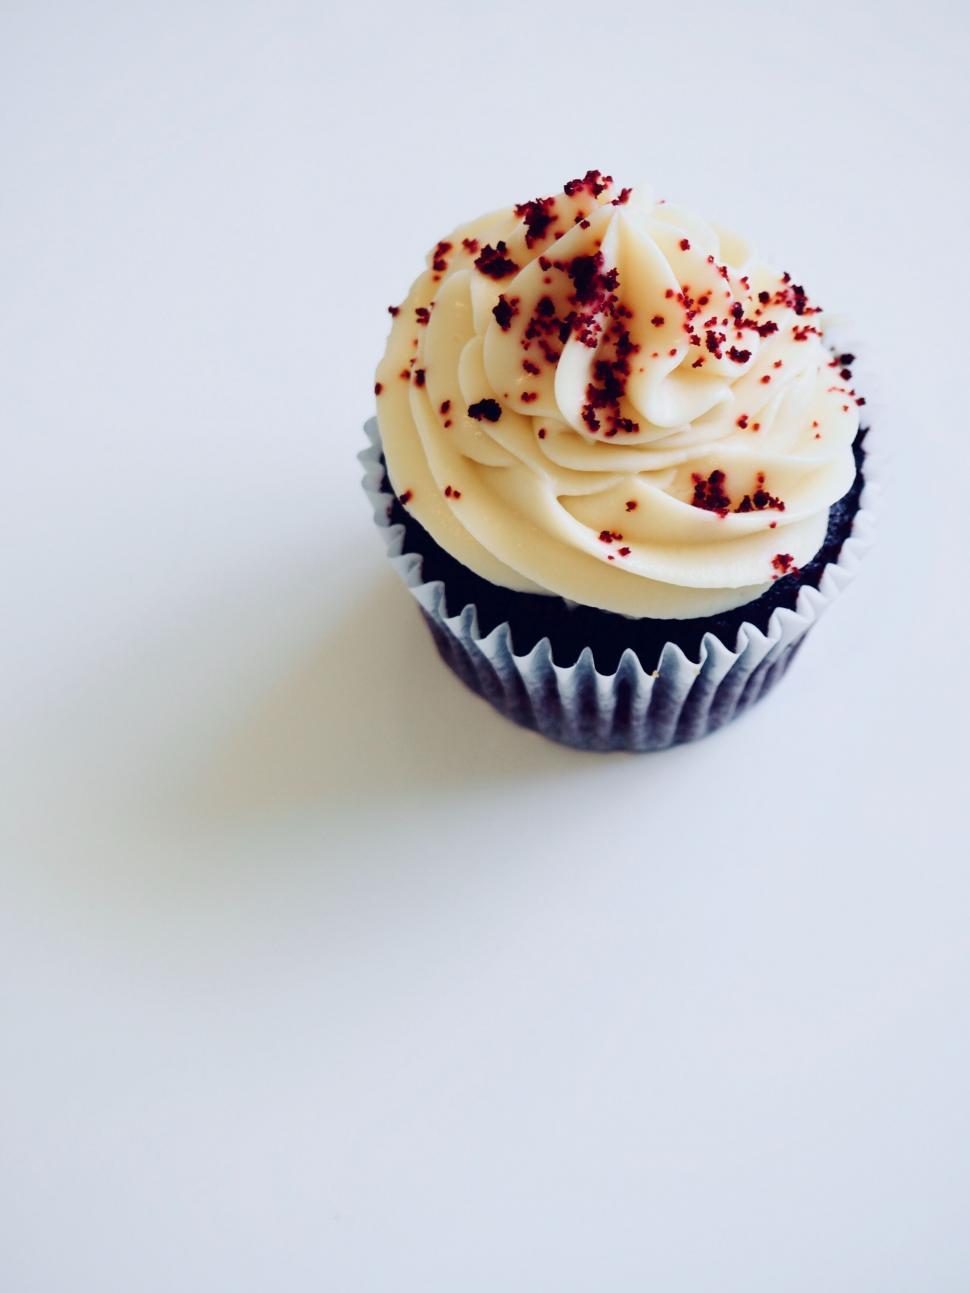 Free Image of Single cupcake with white frosting on plain background 